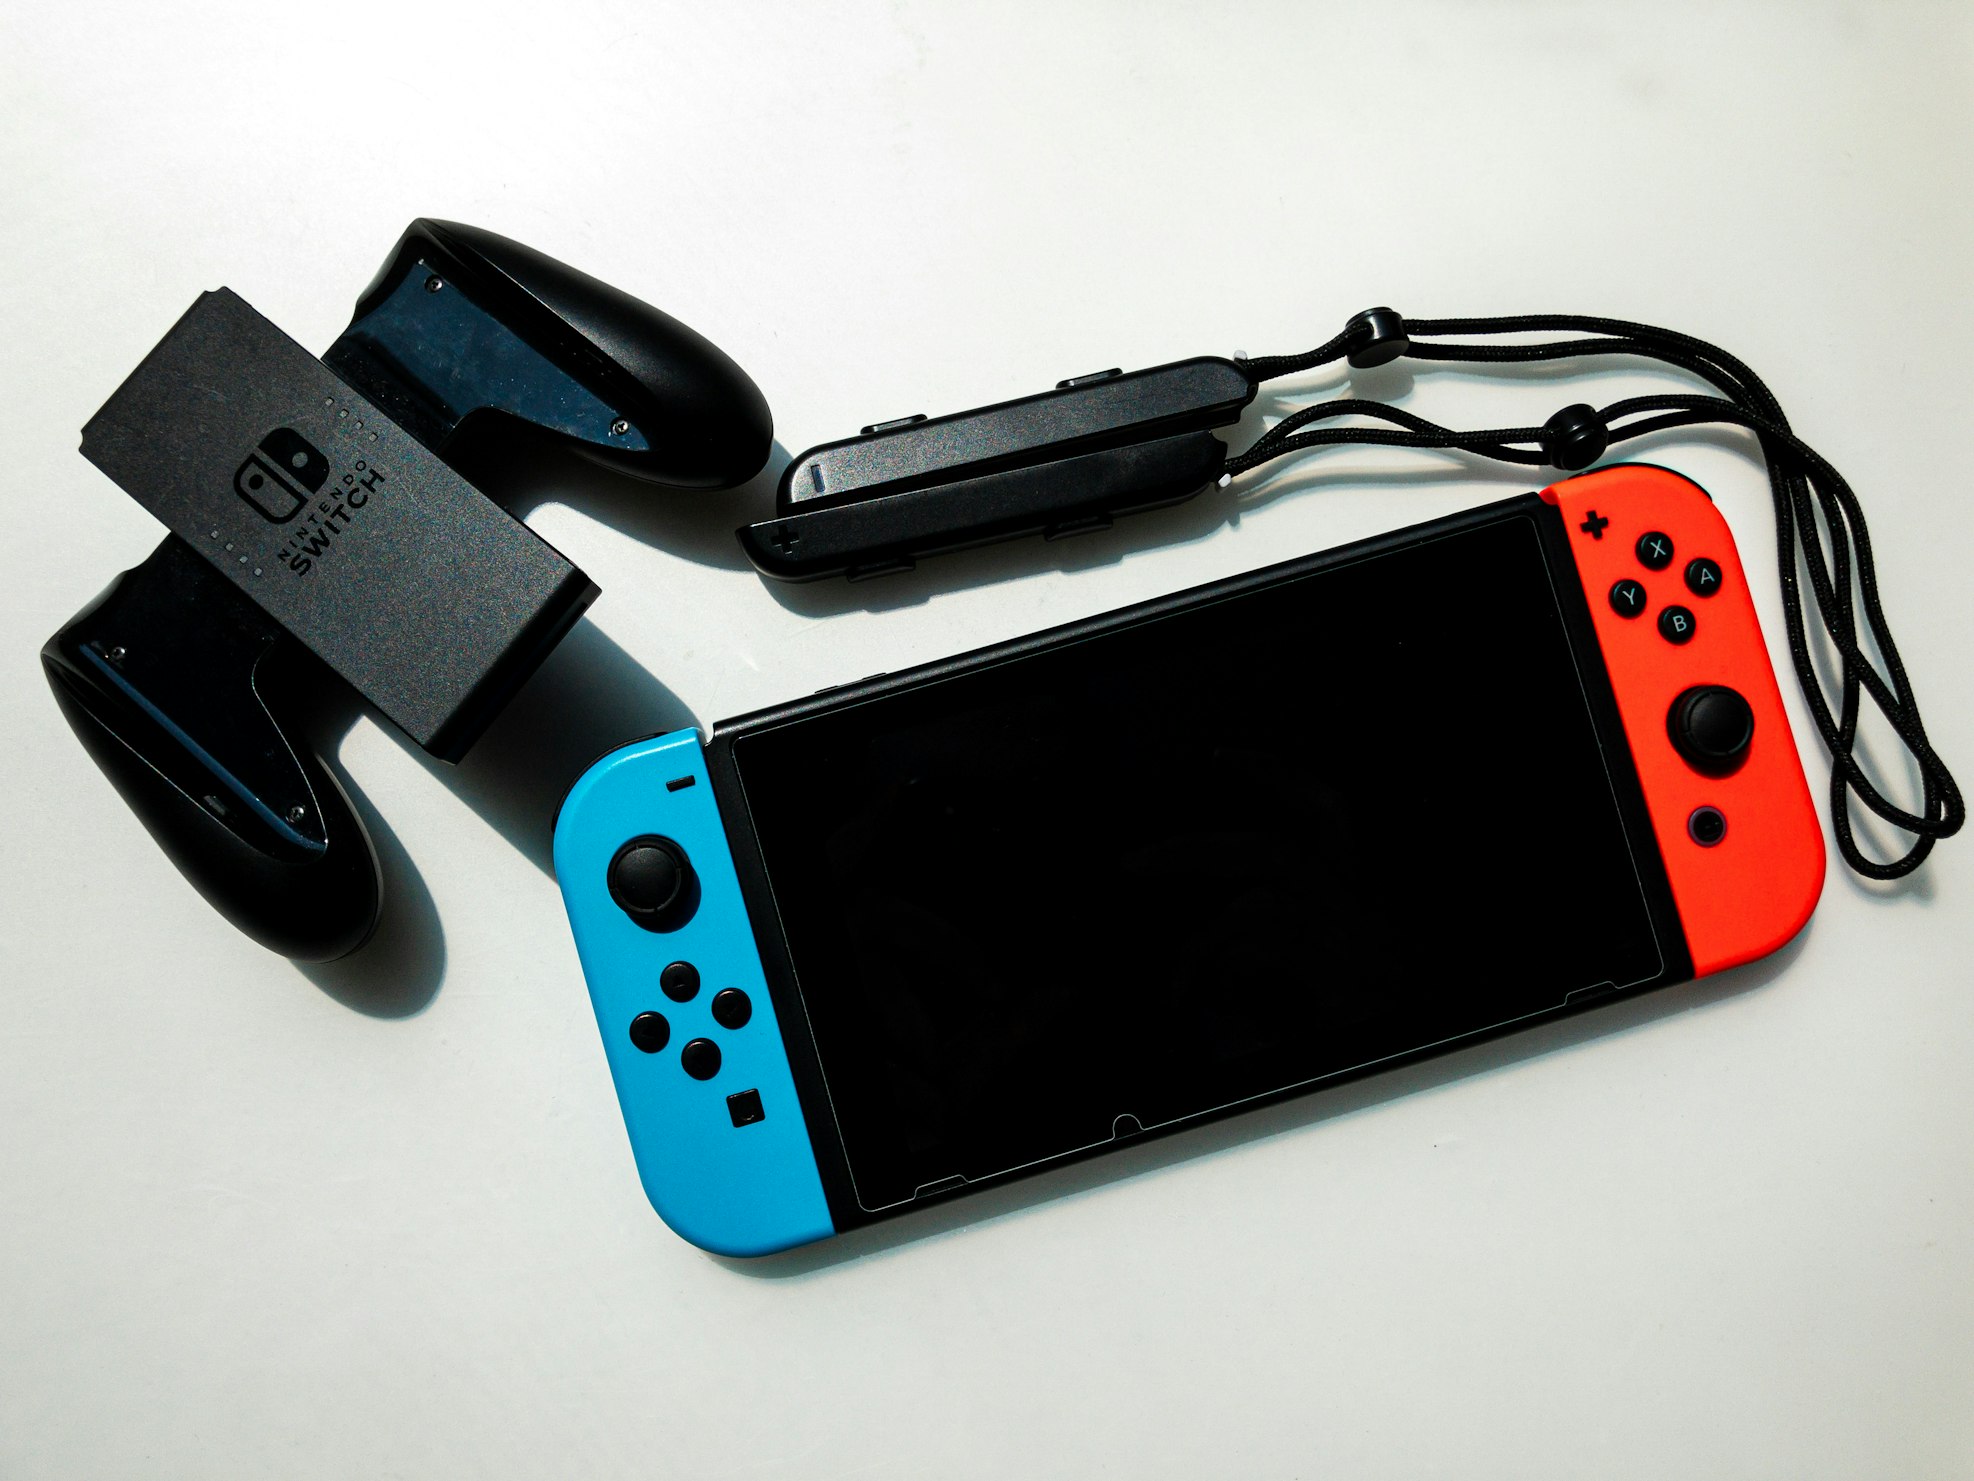 Nintendo Switch Won't Connect to Internet: Troubleshooting Guide